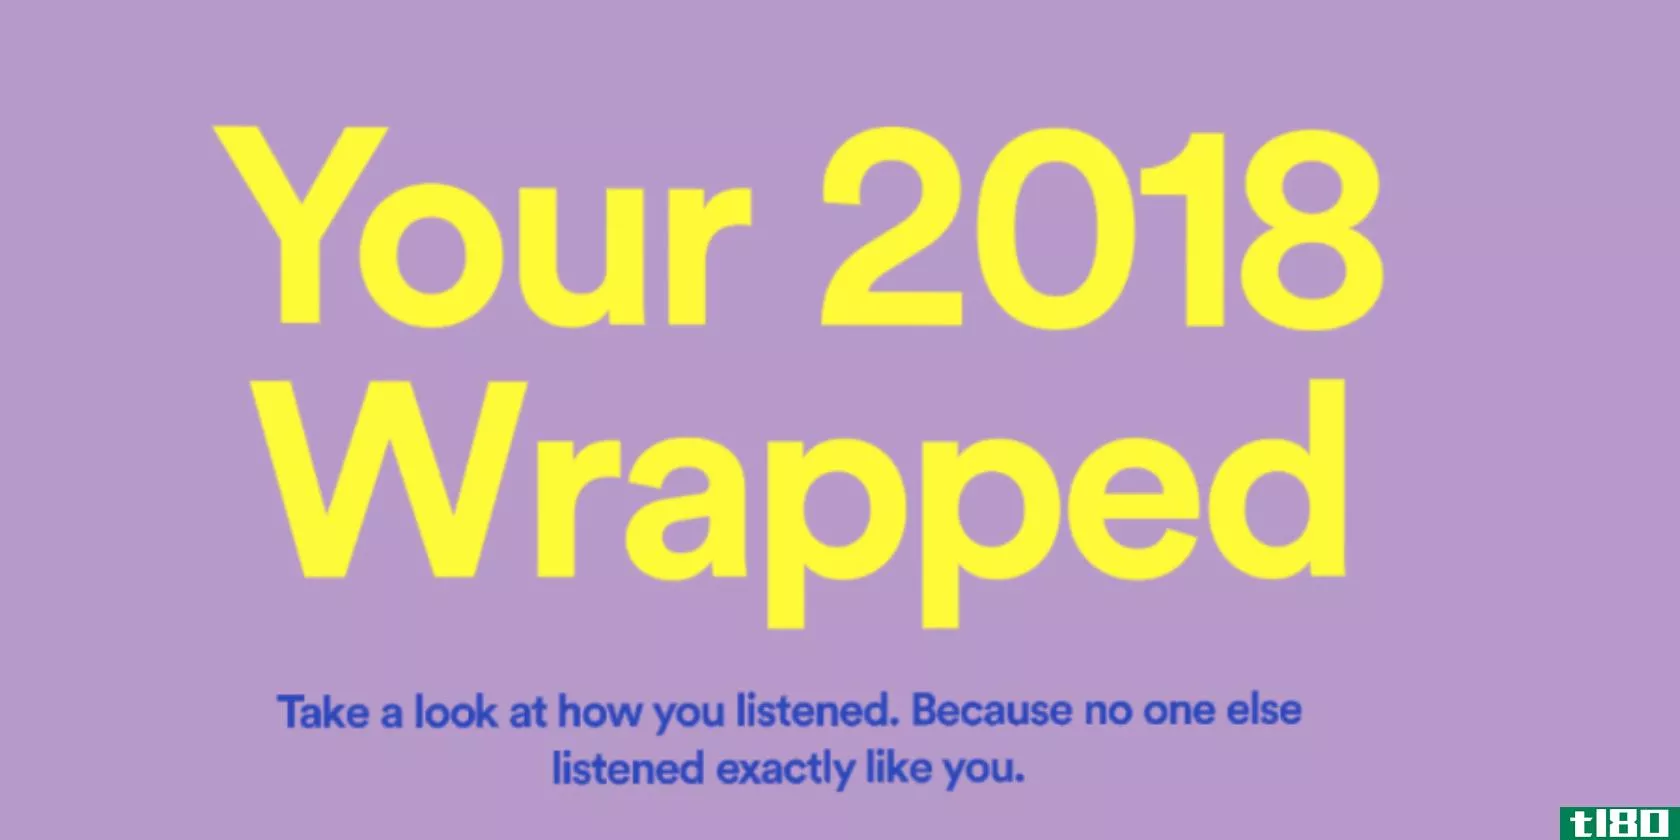 spotify-wrapped-2018-microsite